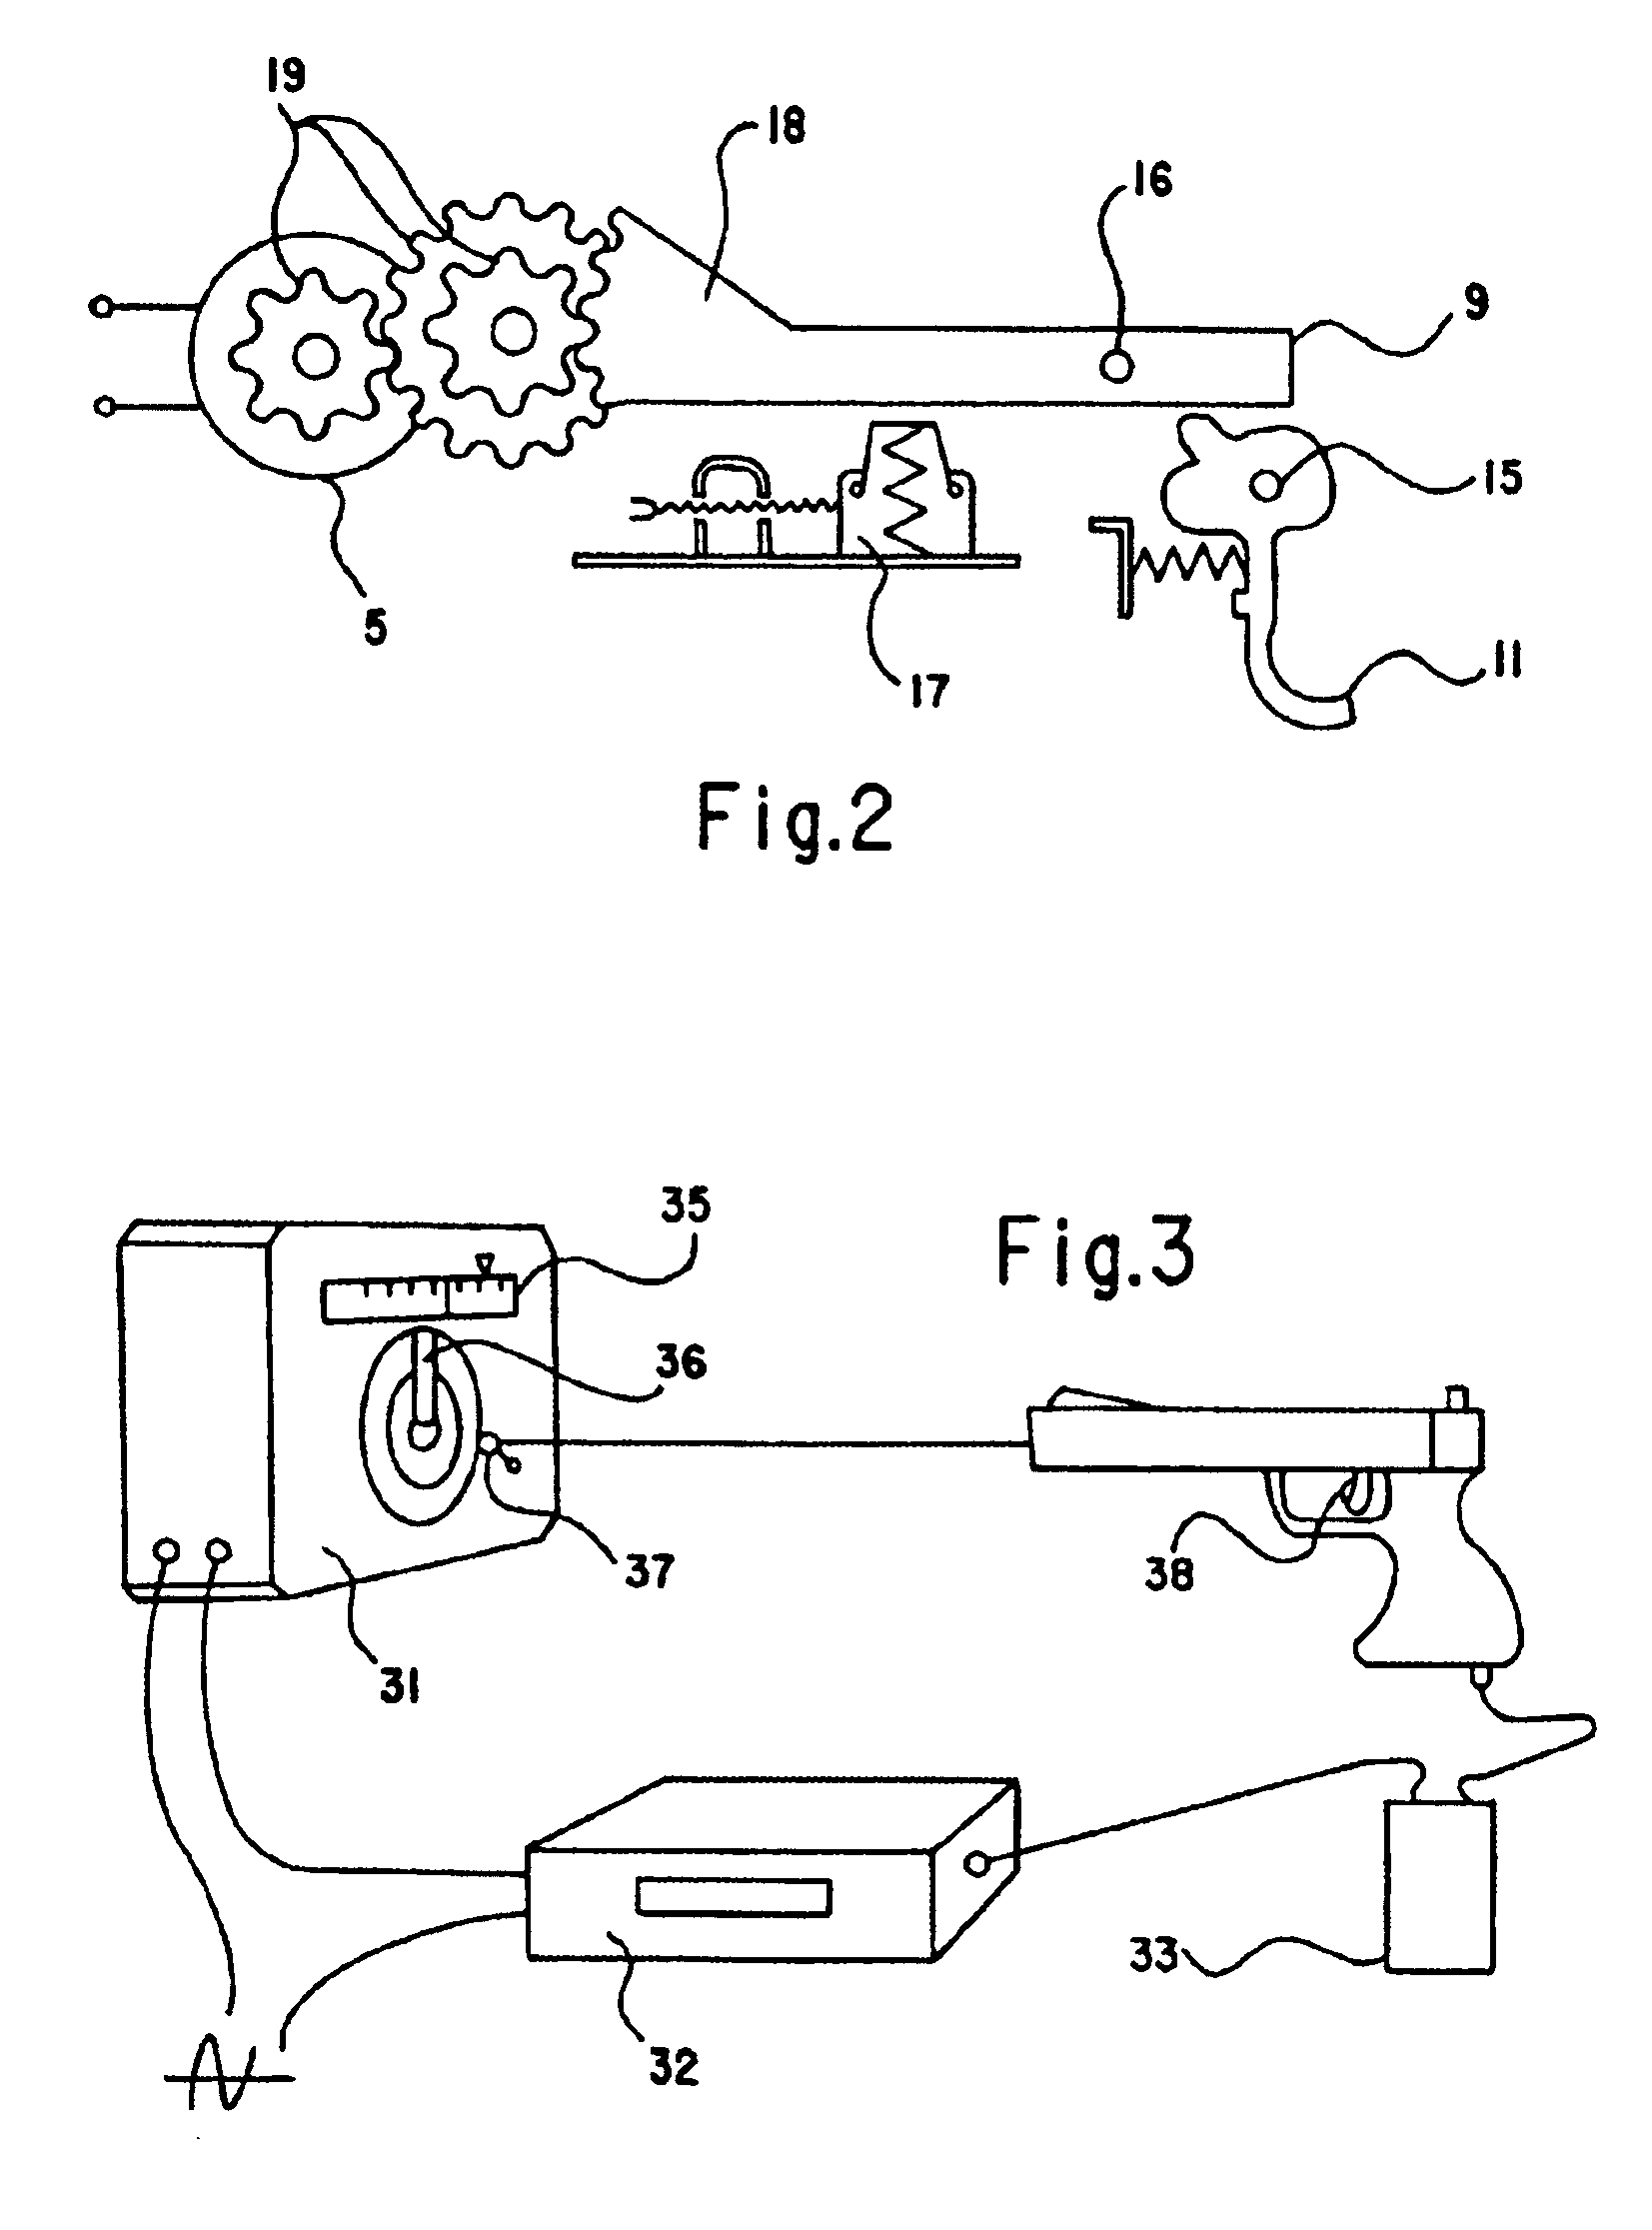 Method and device for training the tactile perception of a marksman, in particular a sport marksman